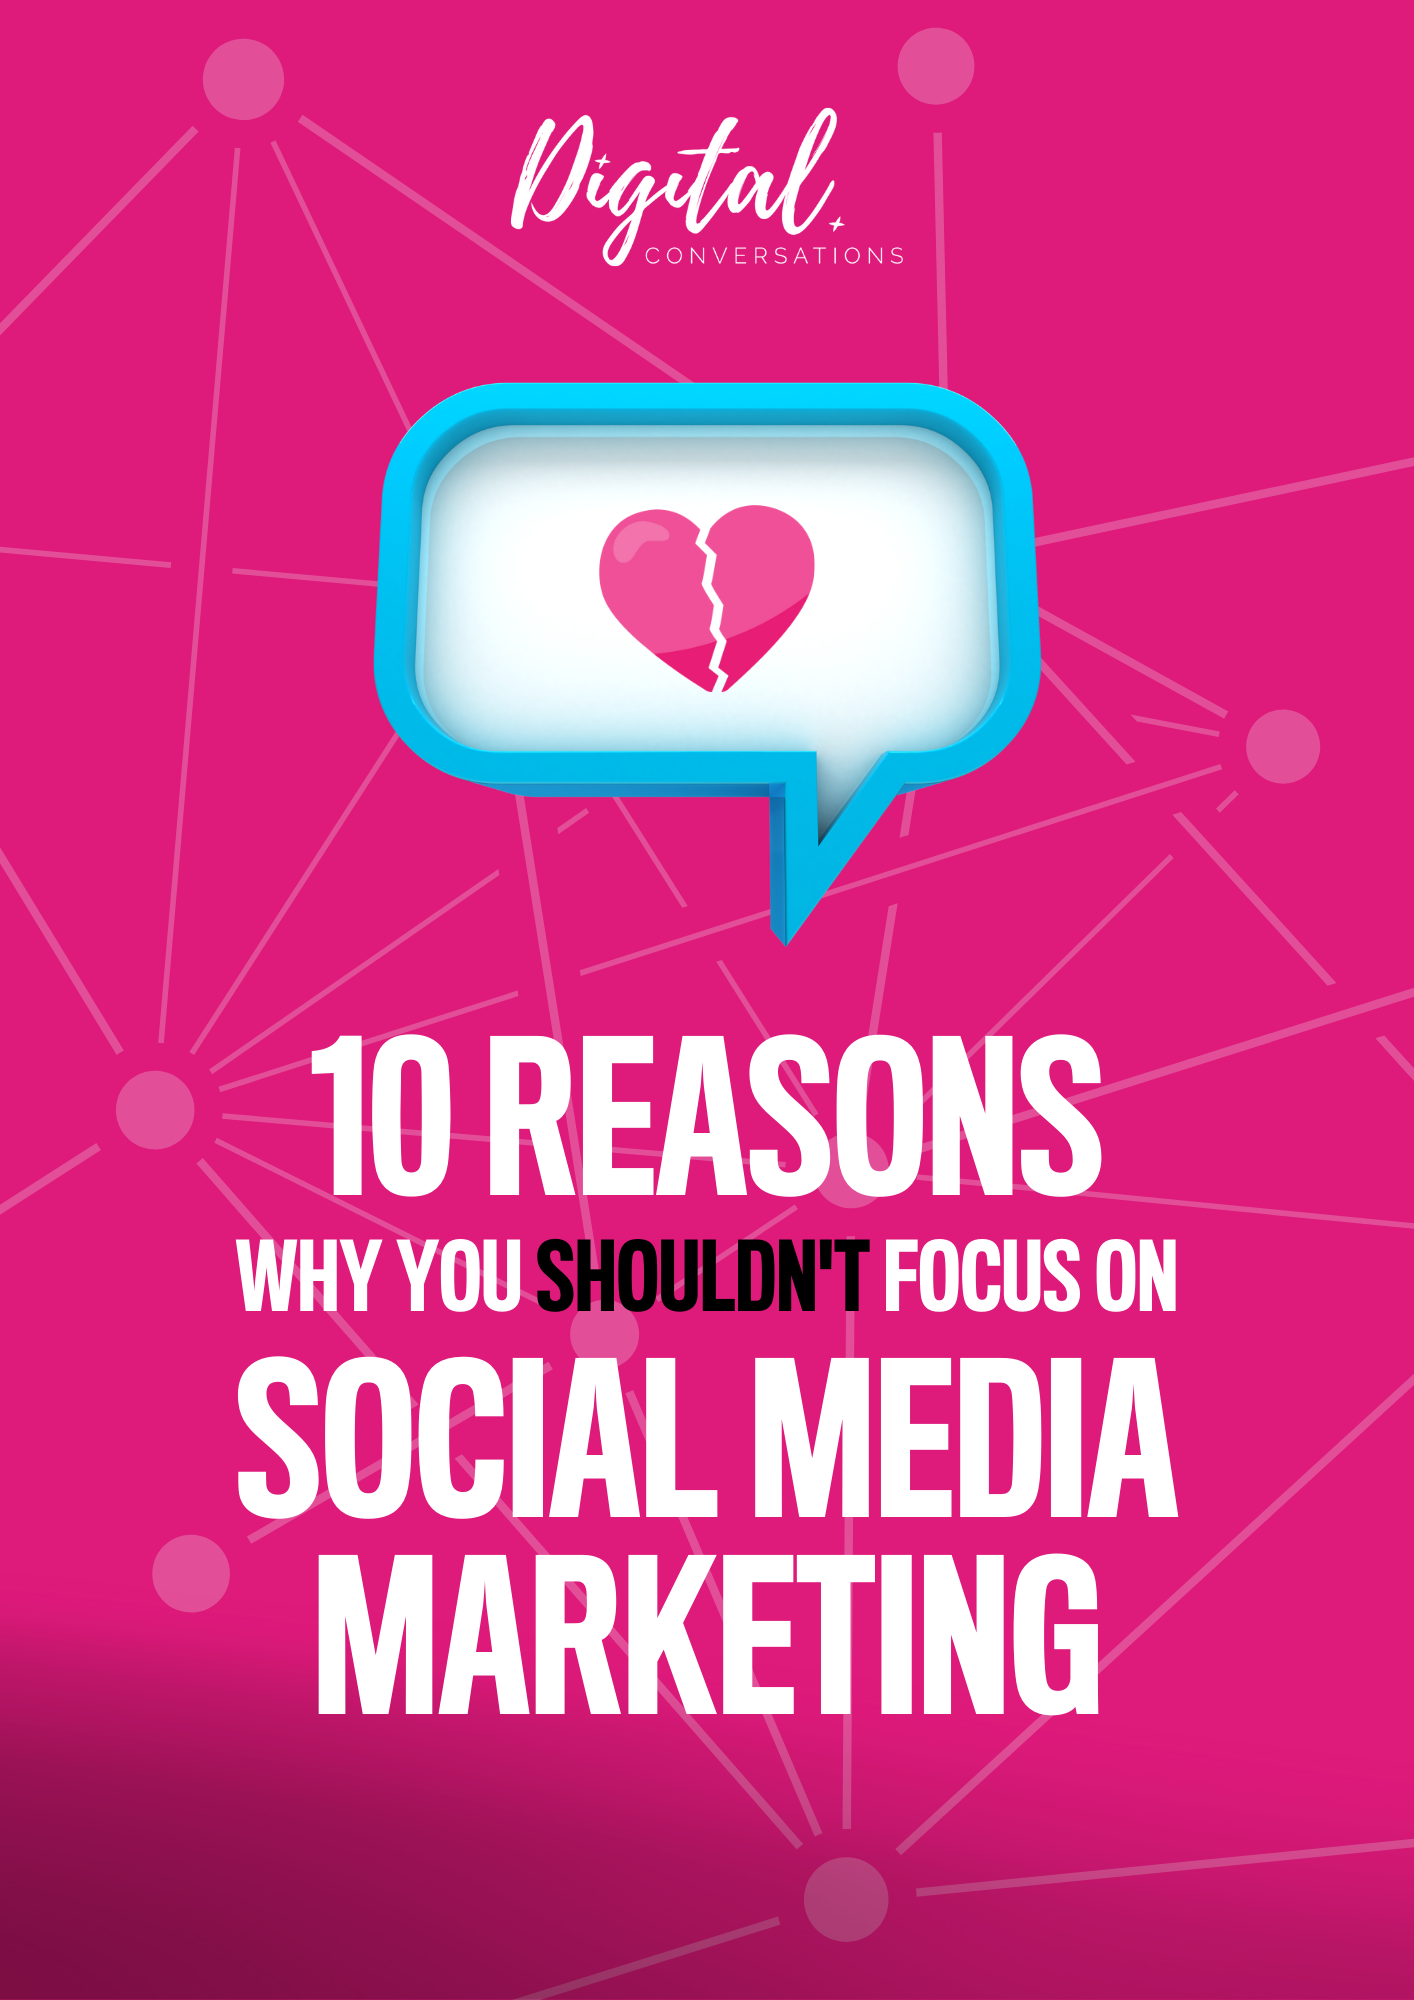 10 Reasons why you shouldn’t focus on social media marketing PDF Download